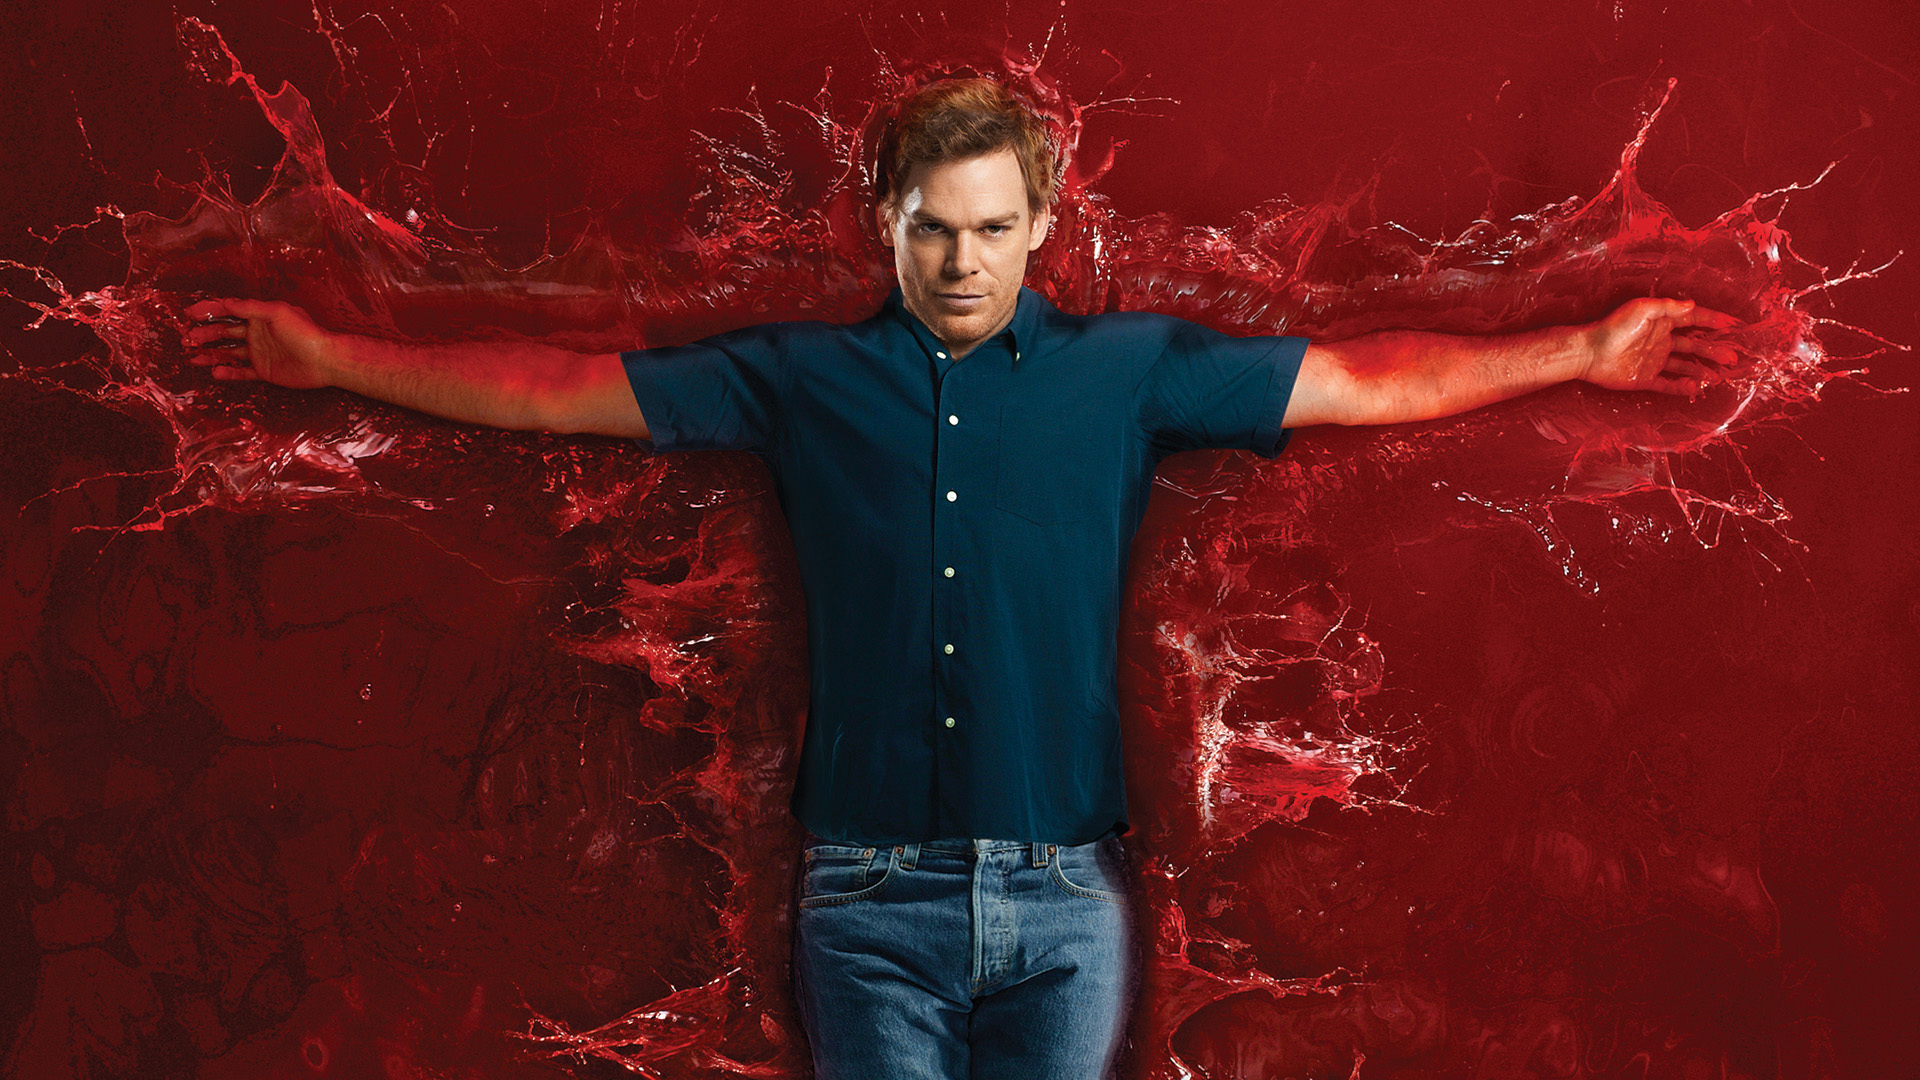 Showtime Series Dexter is Returning in 2021 for a 10Episode Sequel